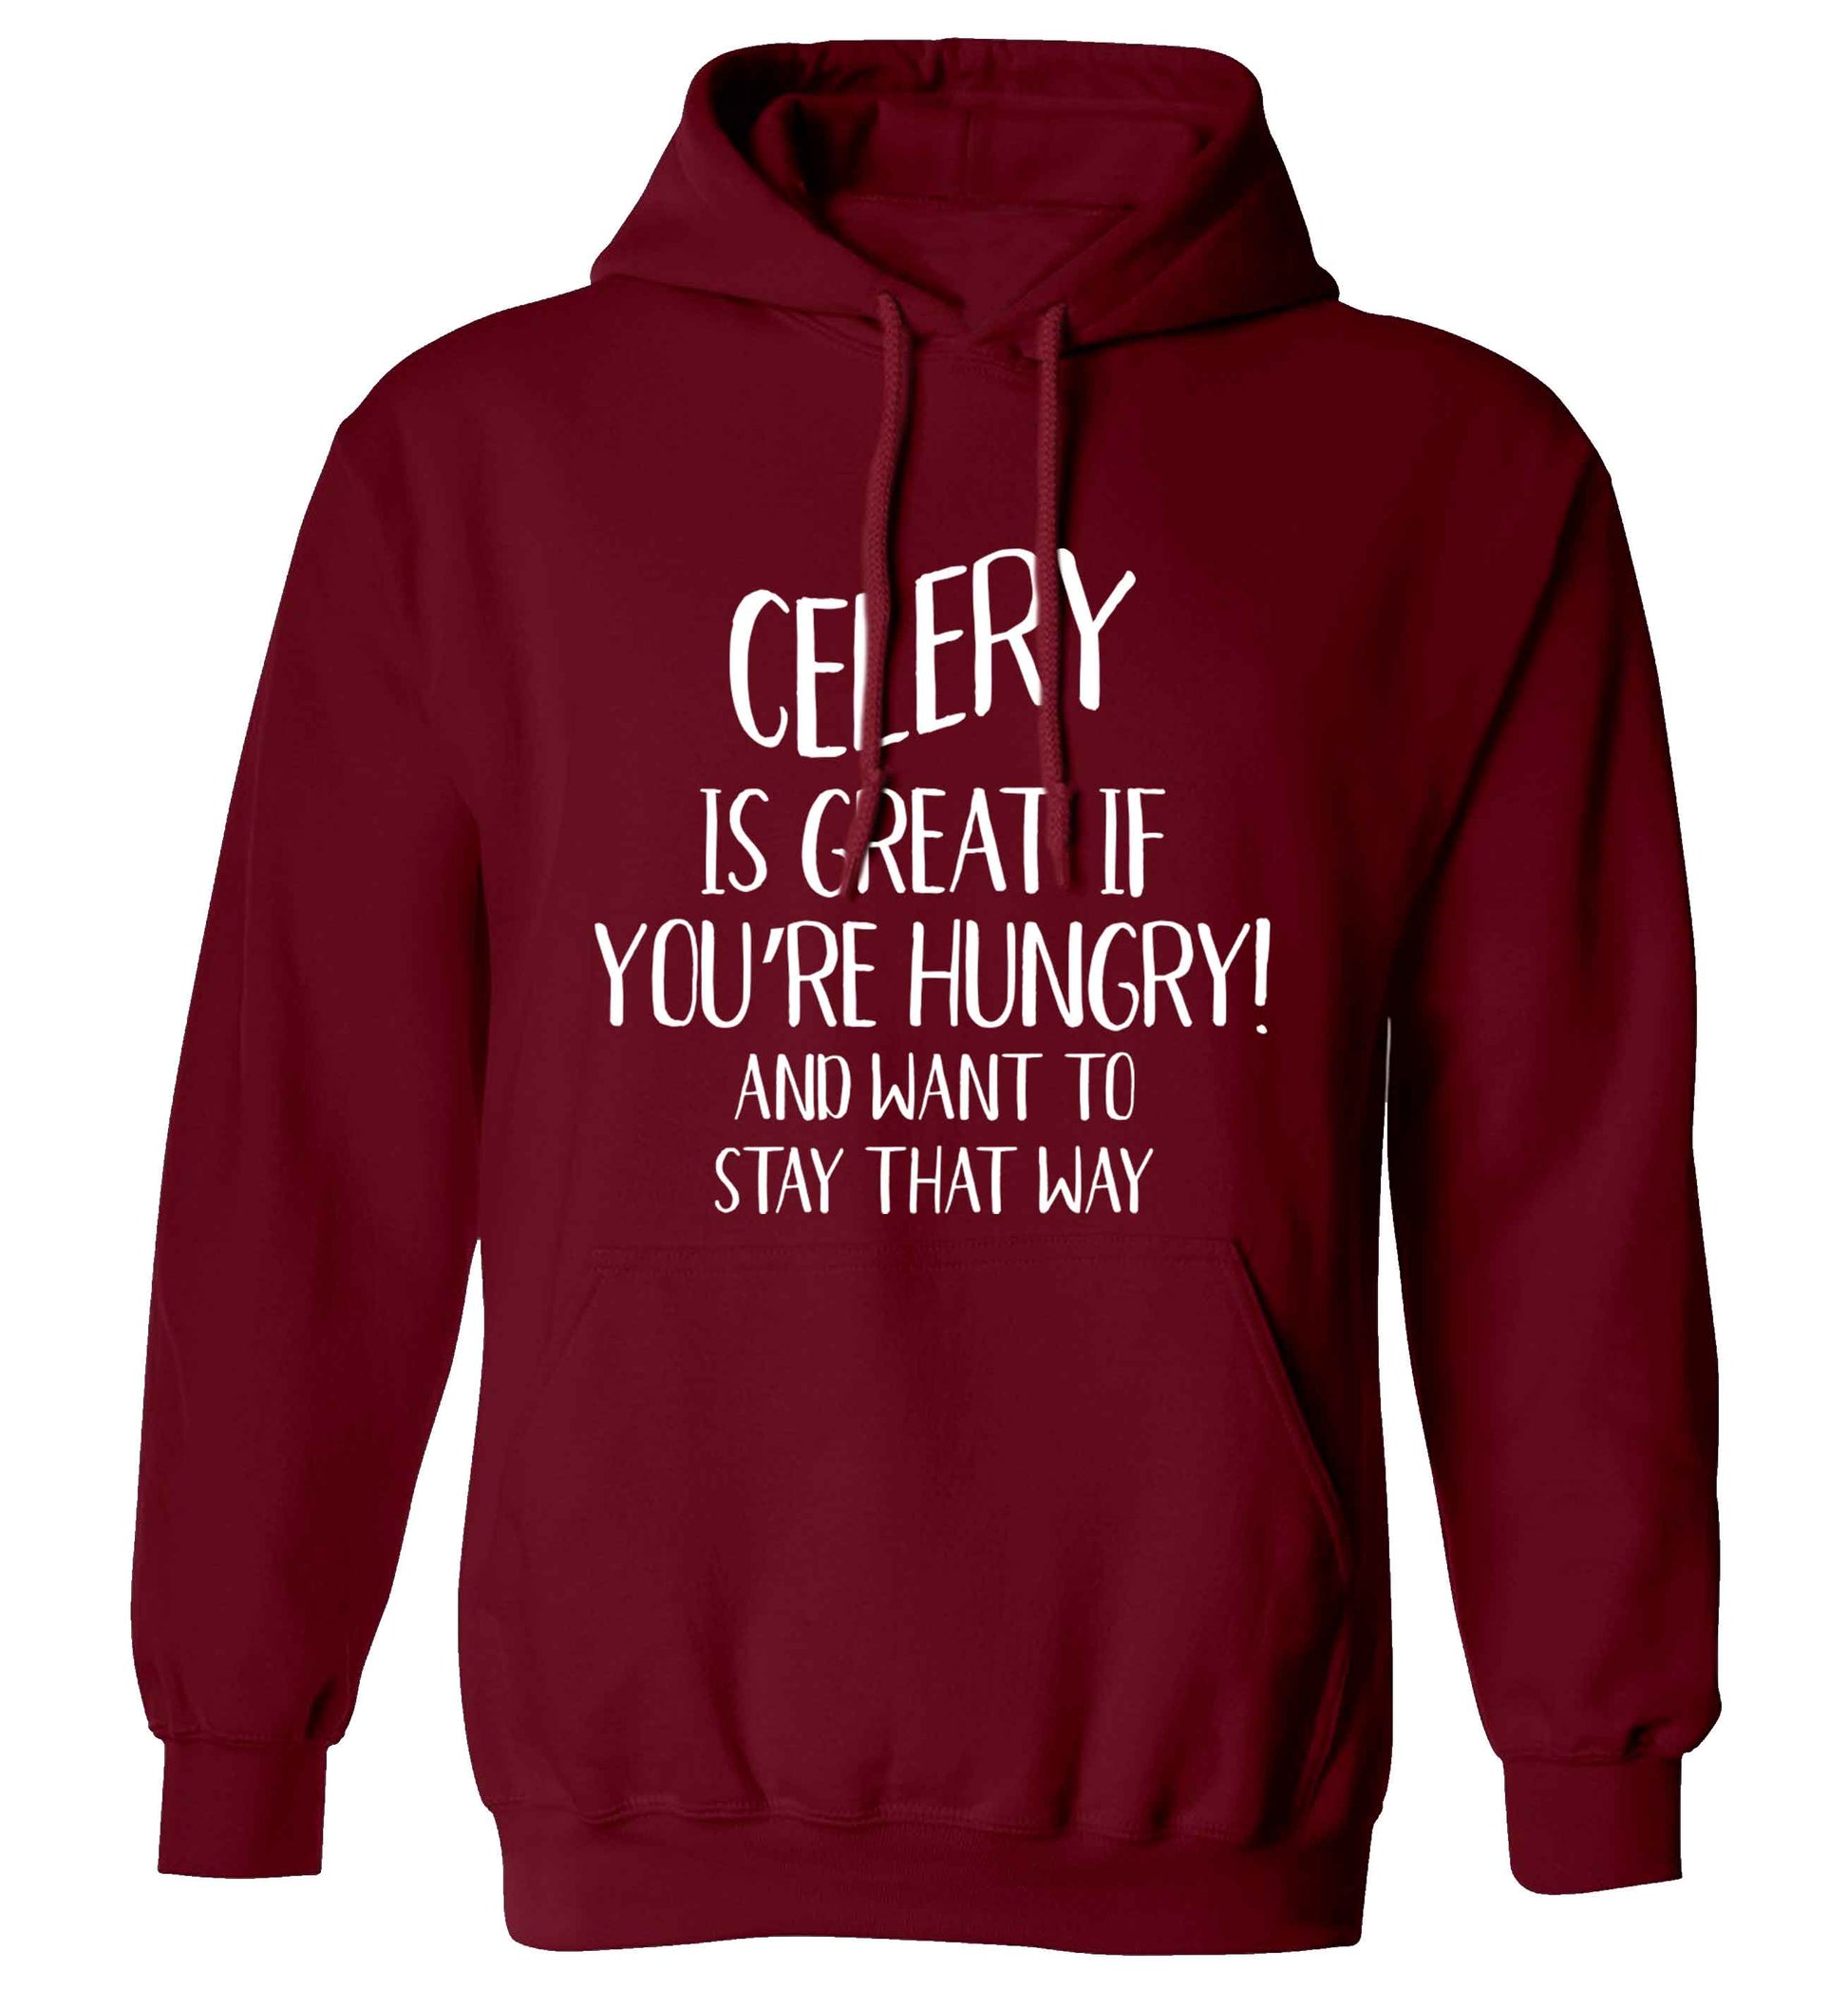 Cellery is great when you're hungry and want to stay that way adults unisex maroon hoodie 2XL